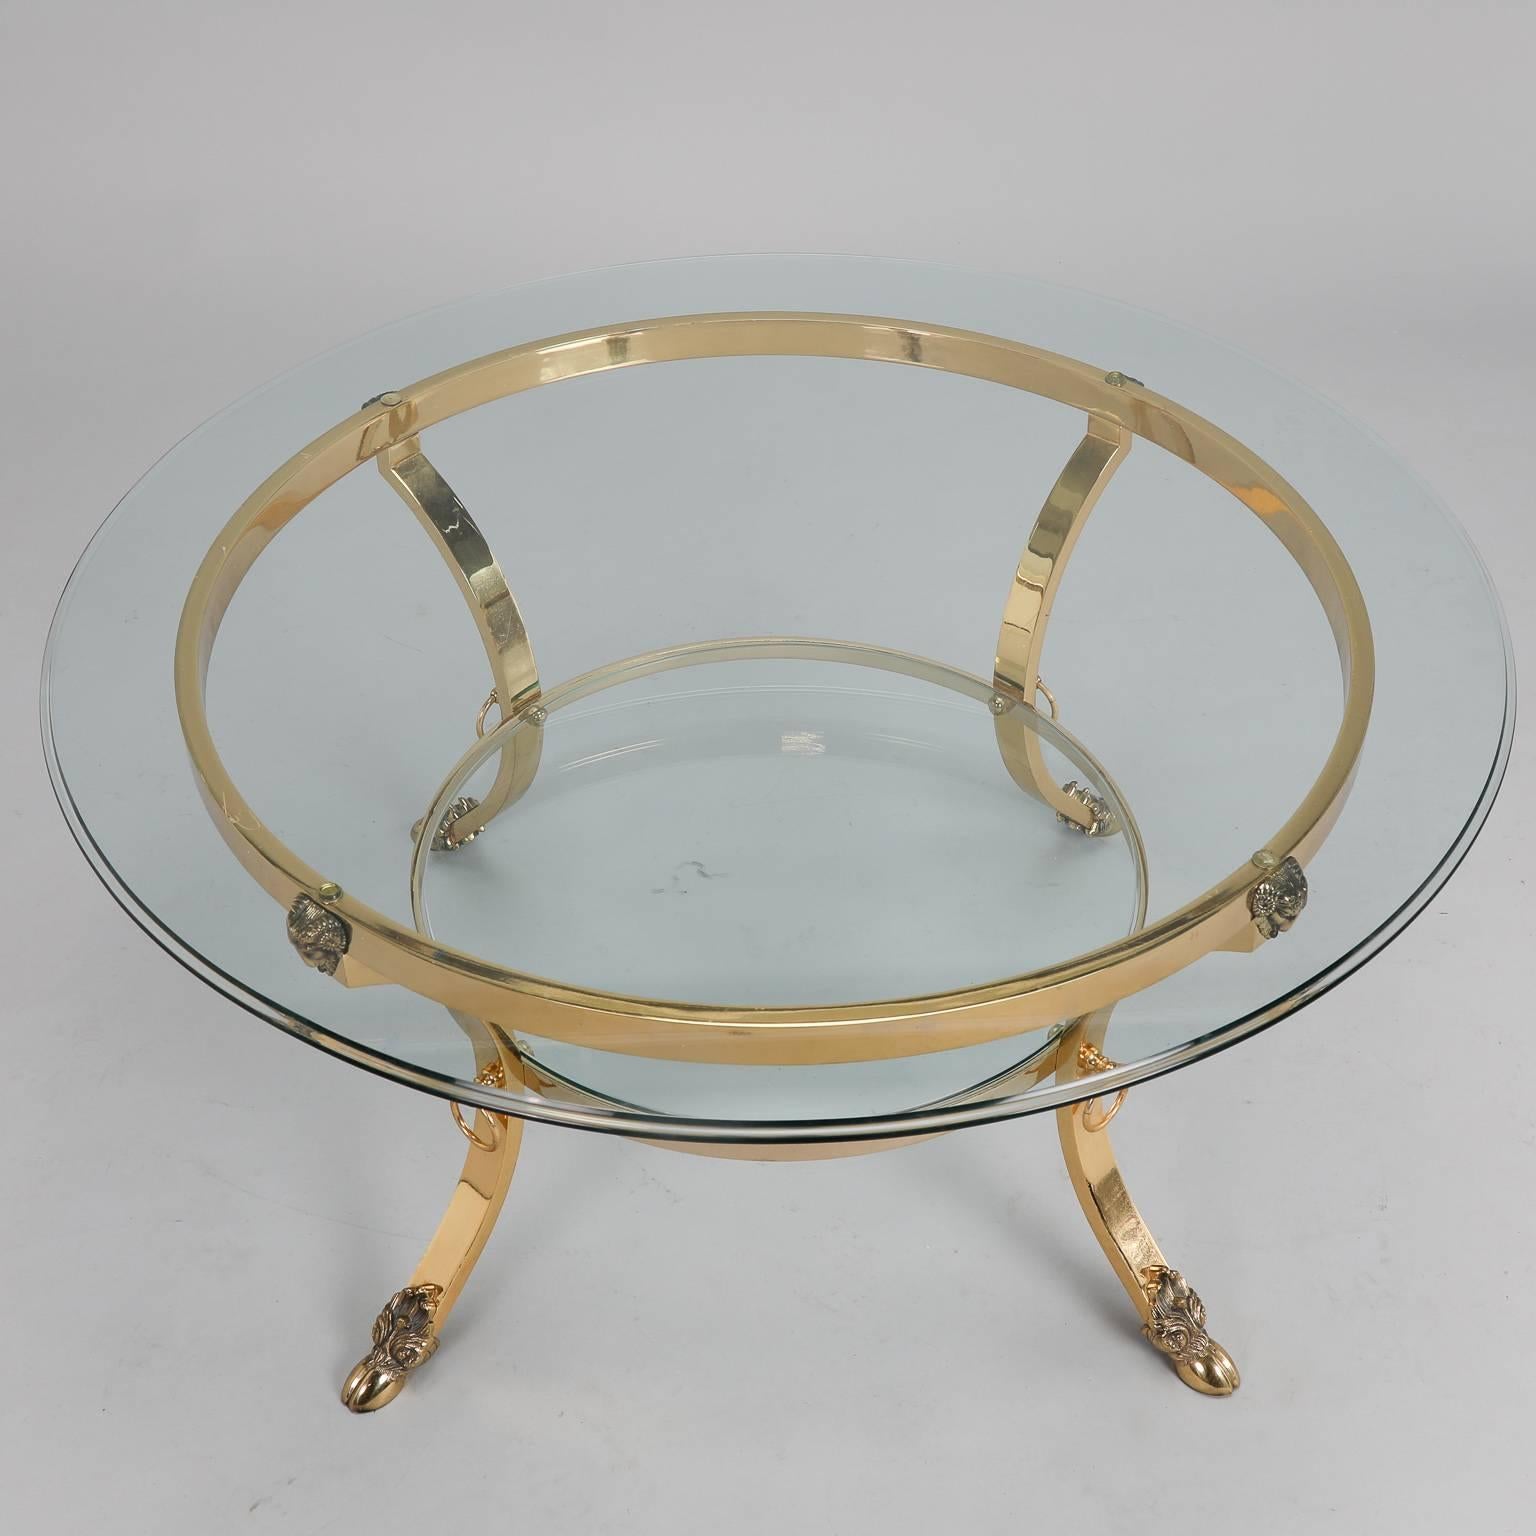 20th Century Mid-Century Spanish Neoclassical Ram’s Foot Cocktail Table